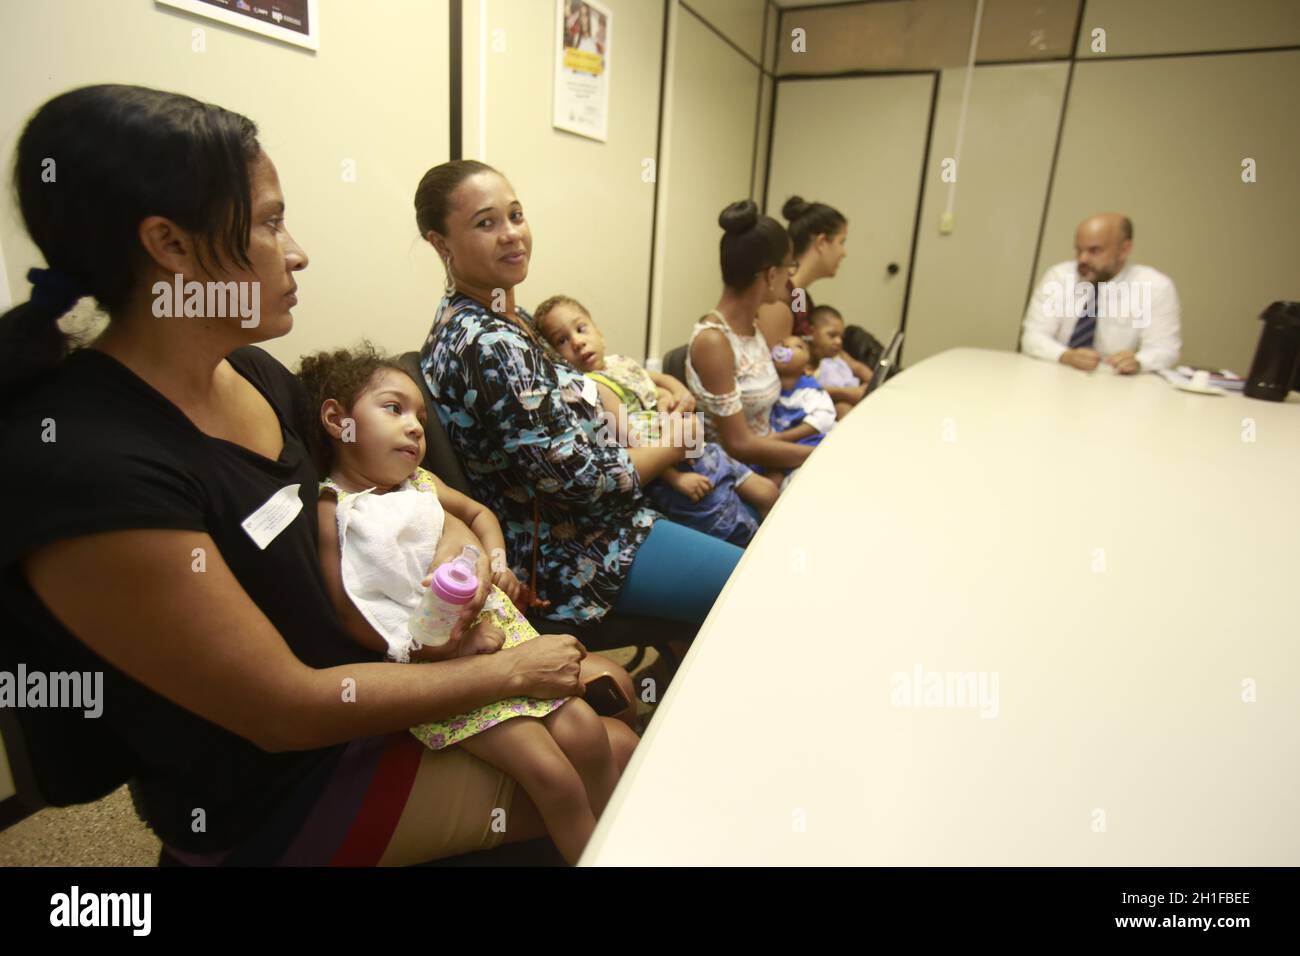 salvador, bahia / brazil - april 17, 2018: Children with microcephaly are seen seeking justice at the Public Prosecution Service in Salvador. The dise Stock Photo